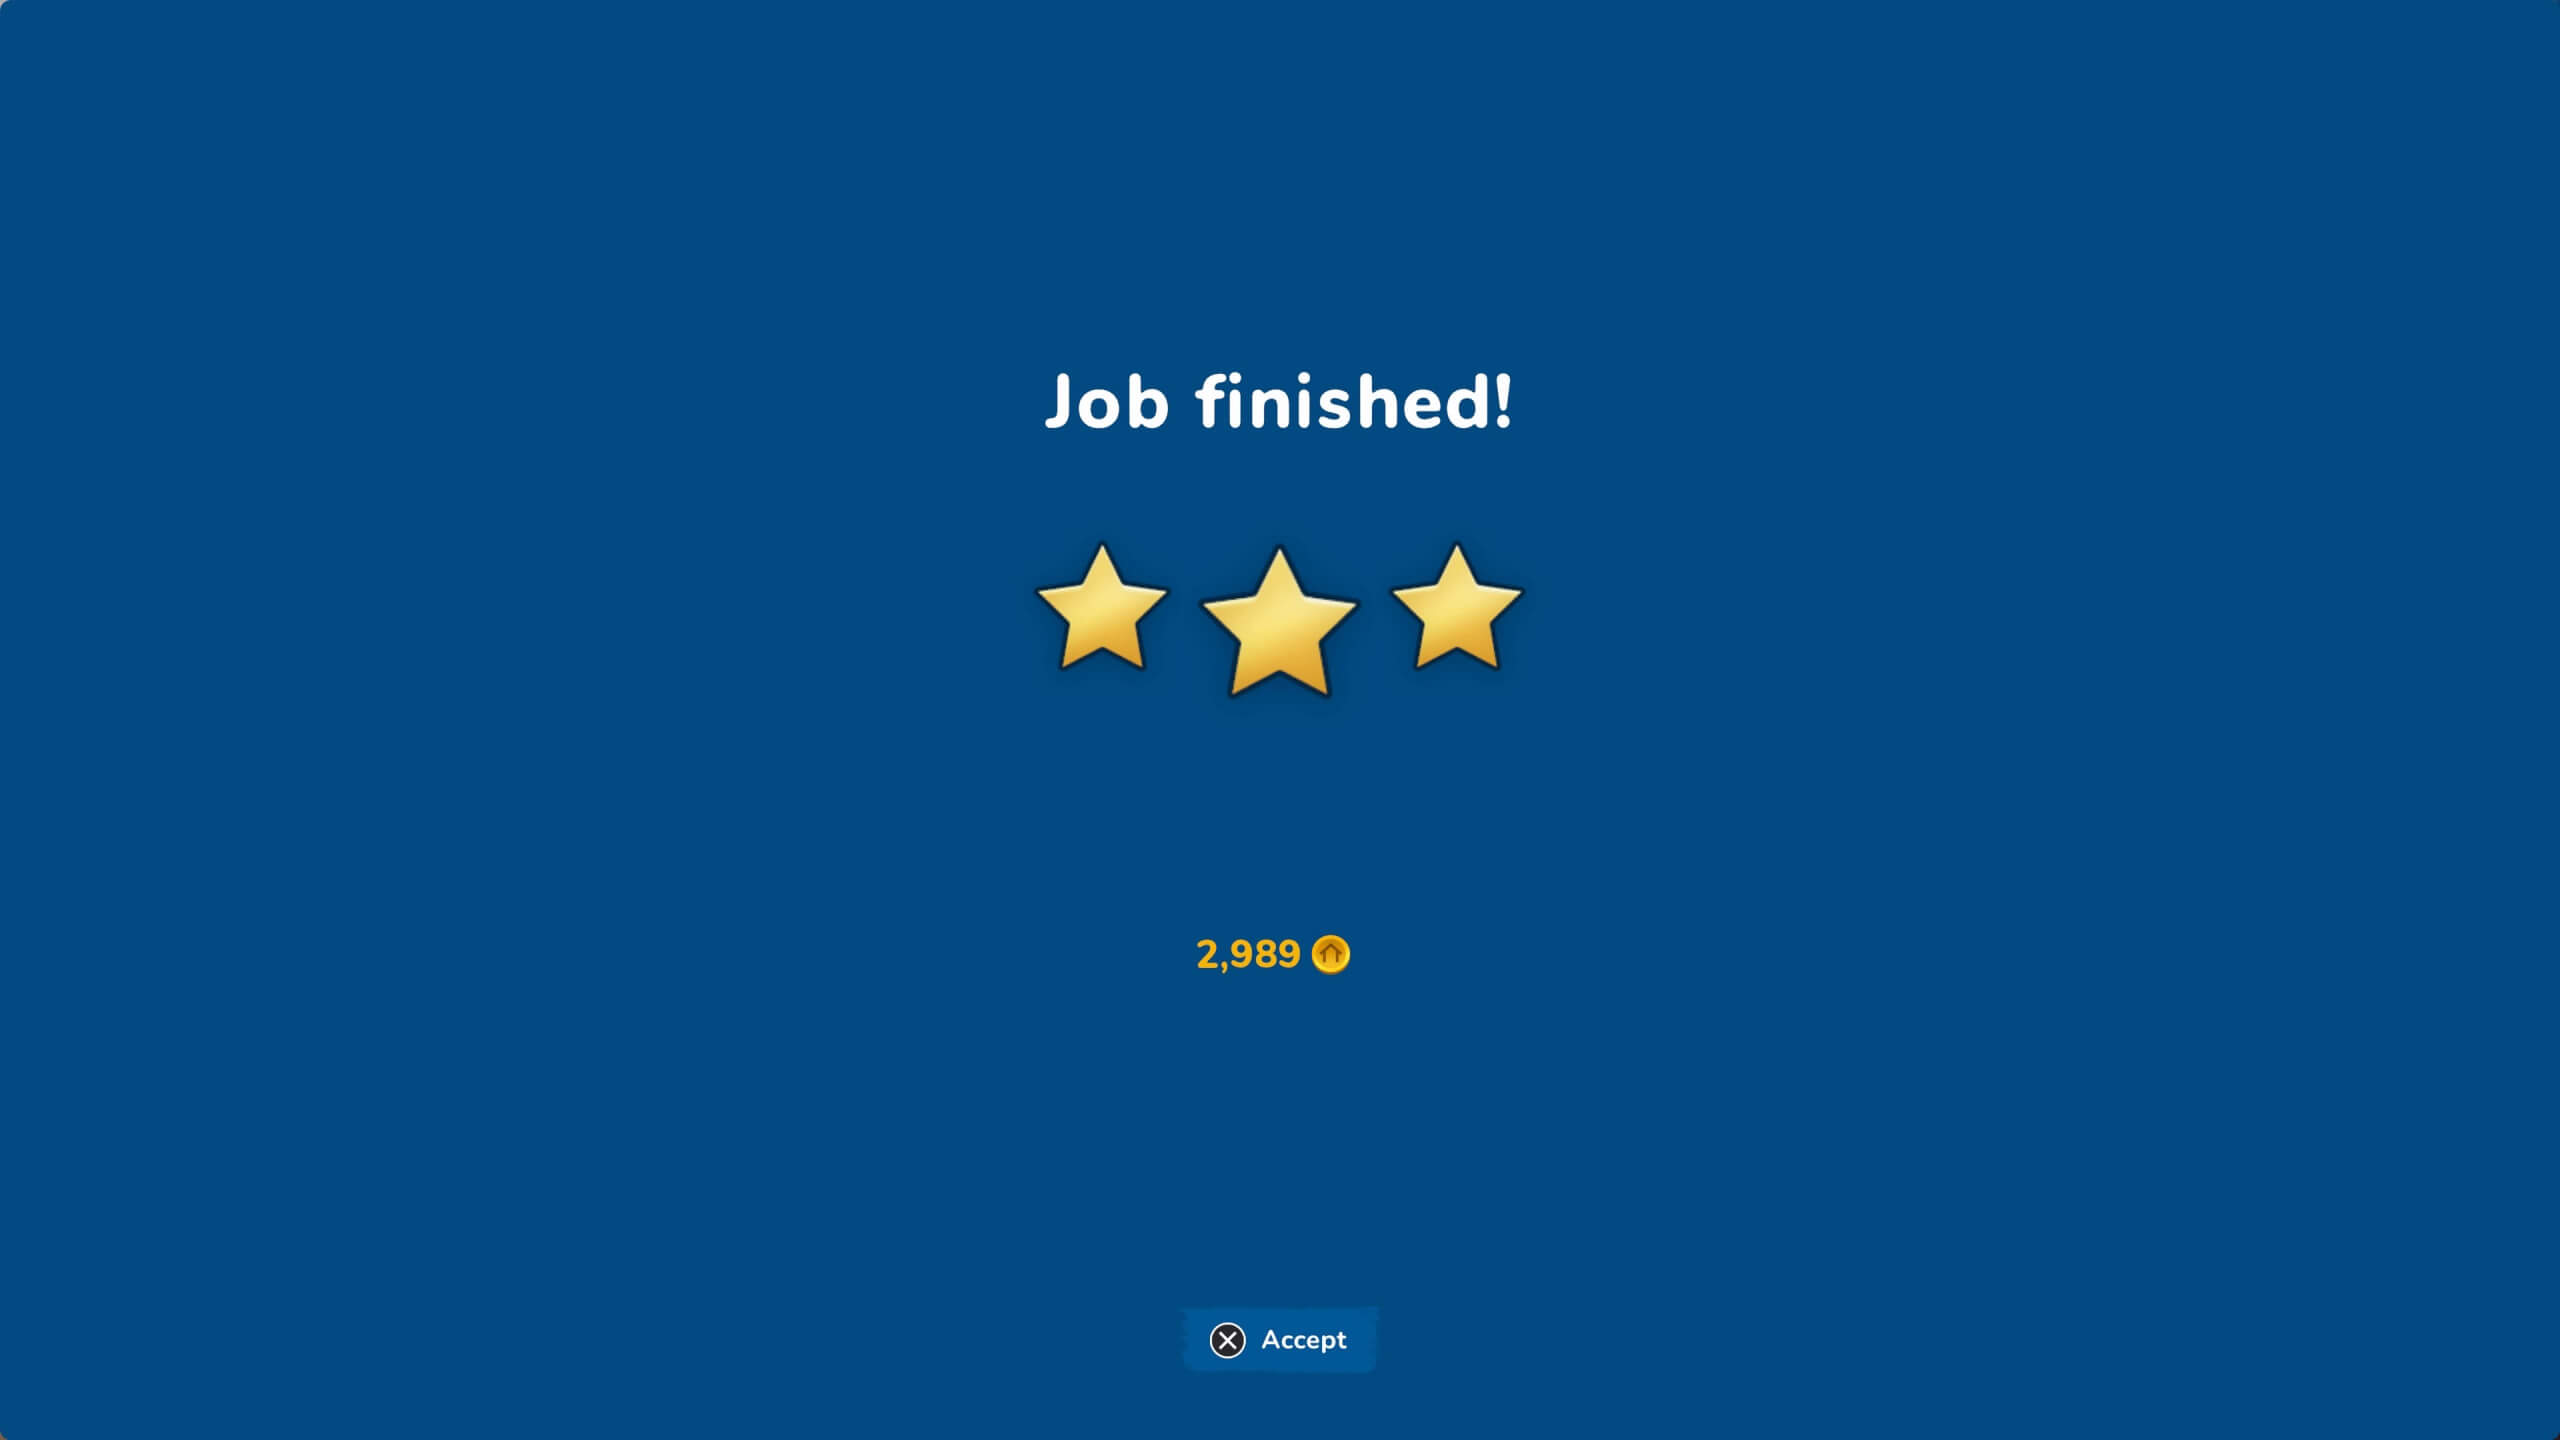 "Job Finished!" and three stars can be seen.